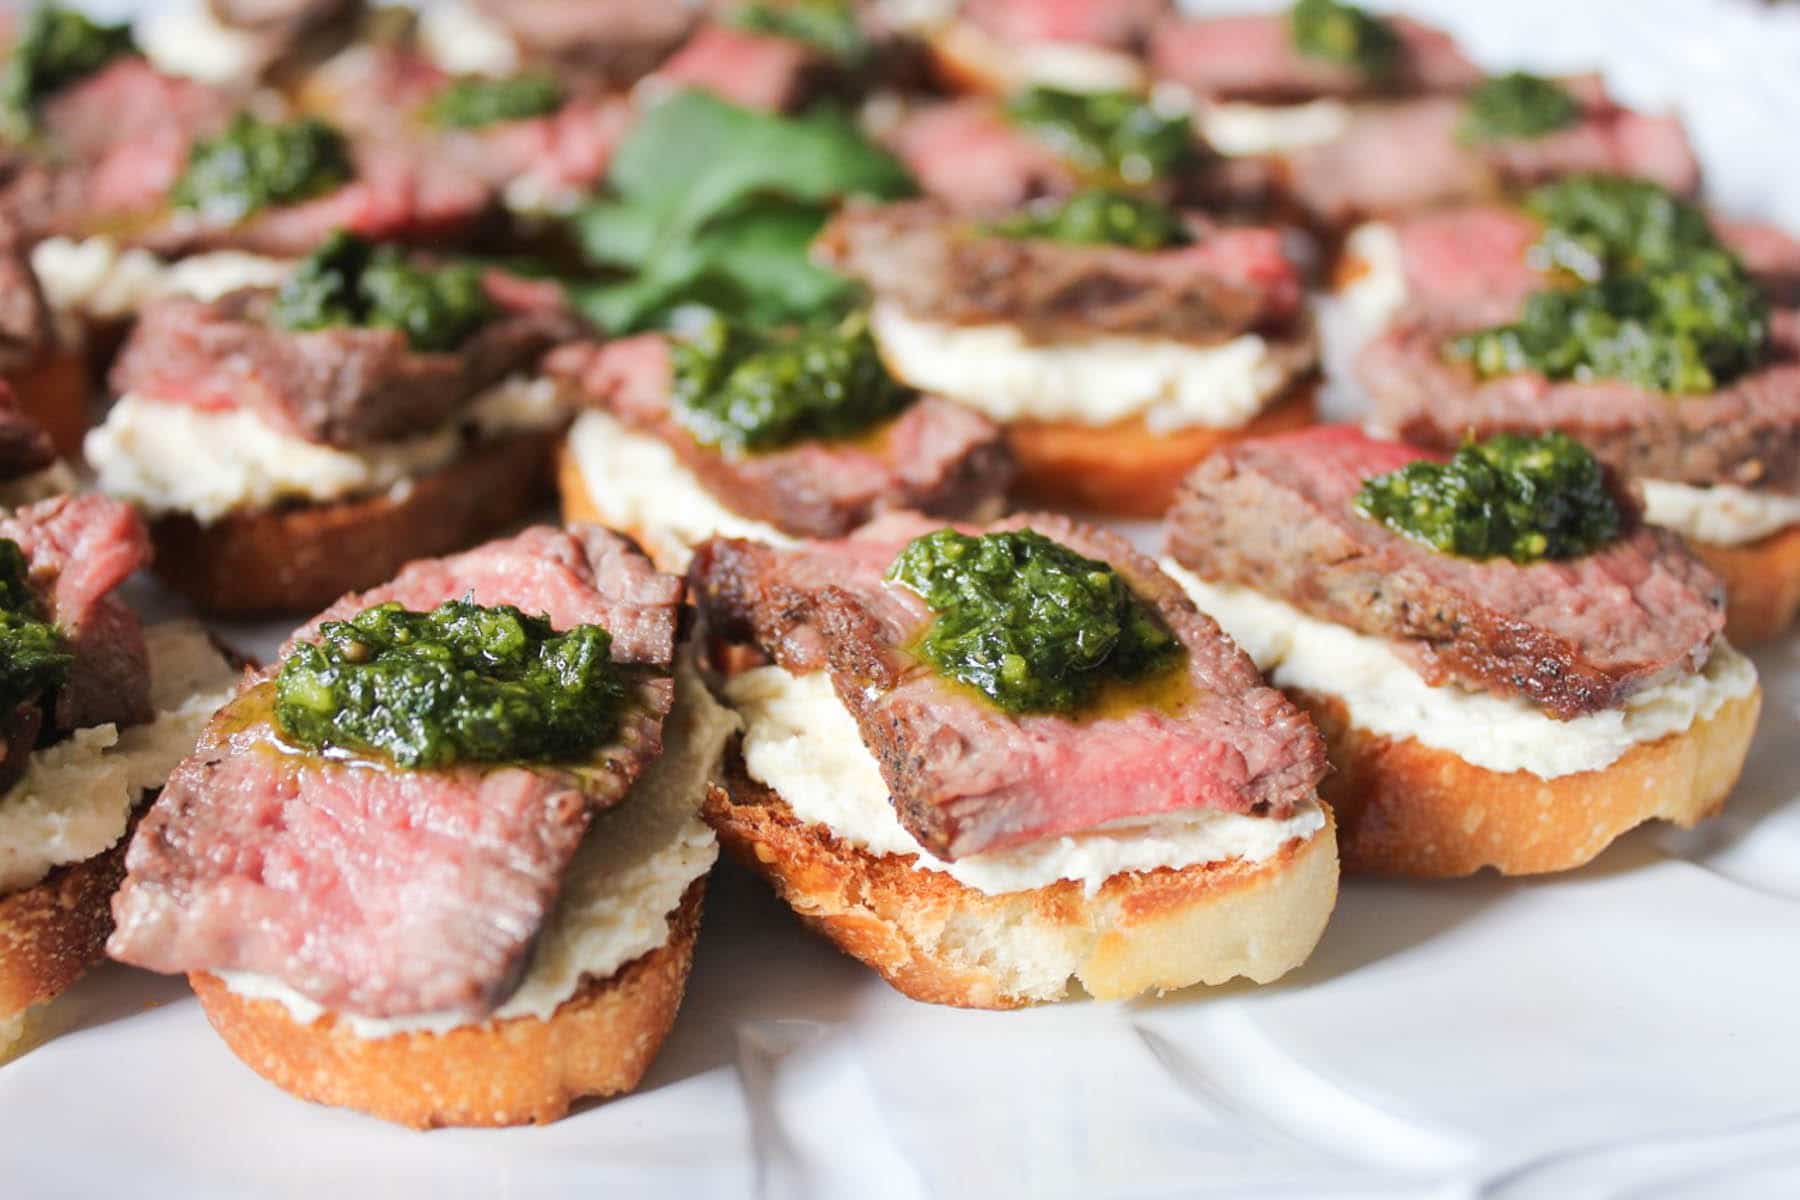 beef-tenderloin-crostini-with-whipped-goat-cheese-and-pesto-8